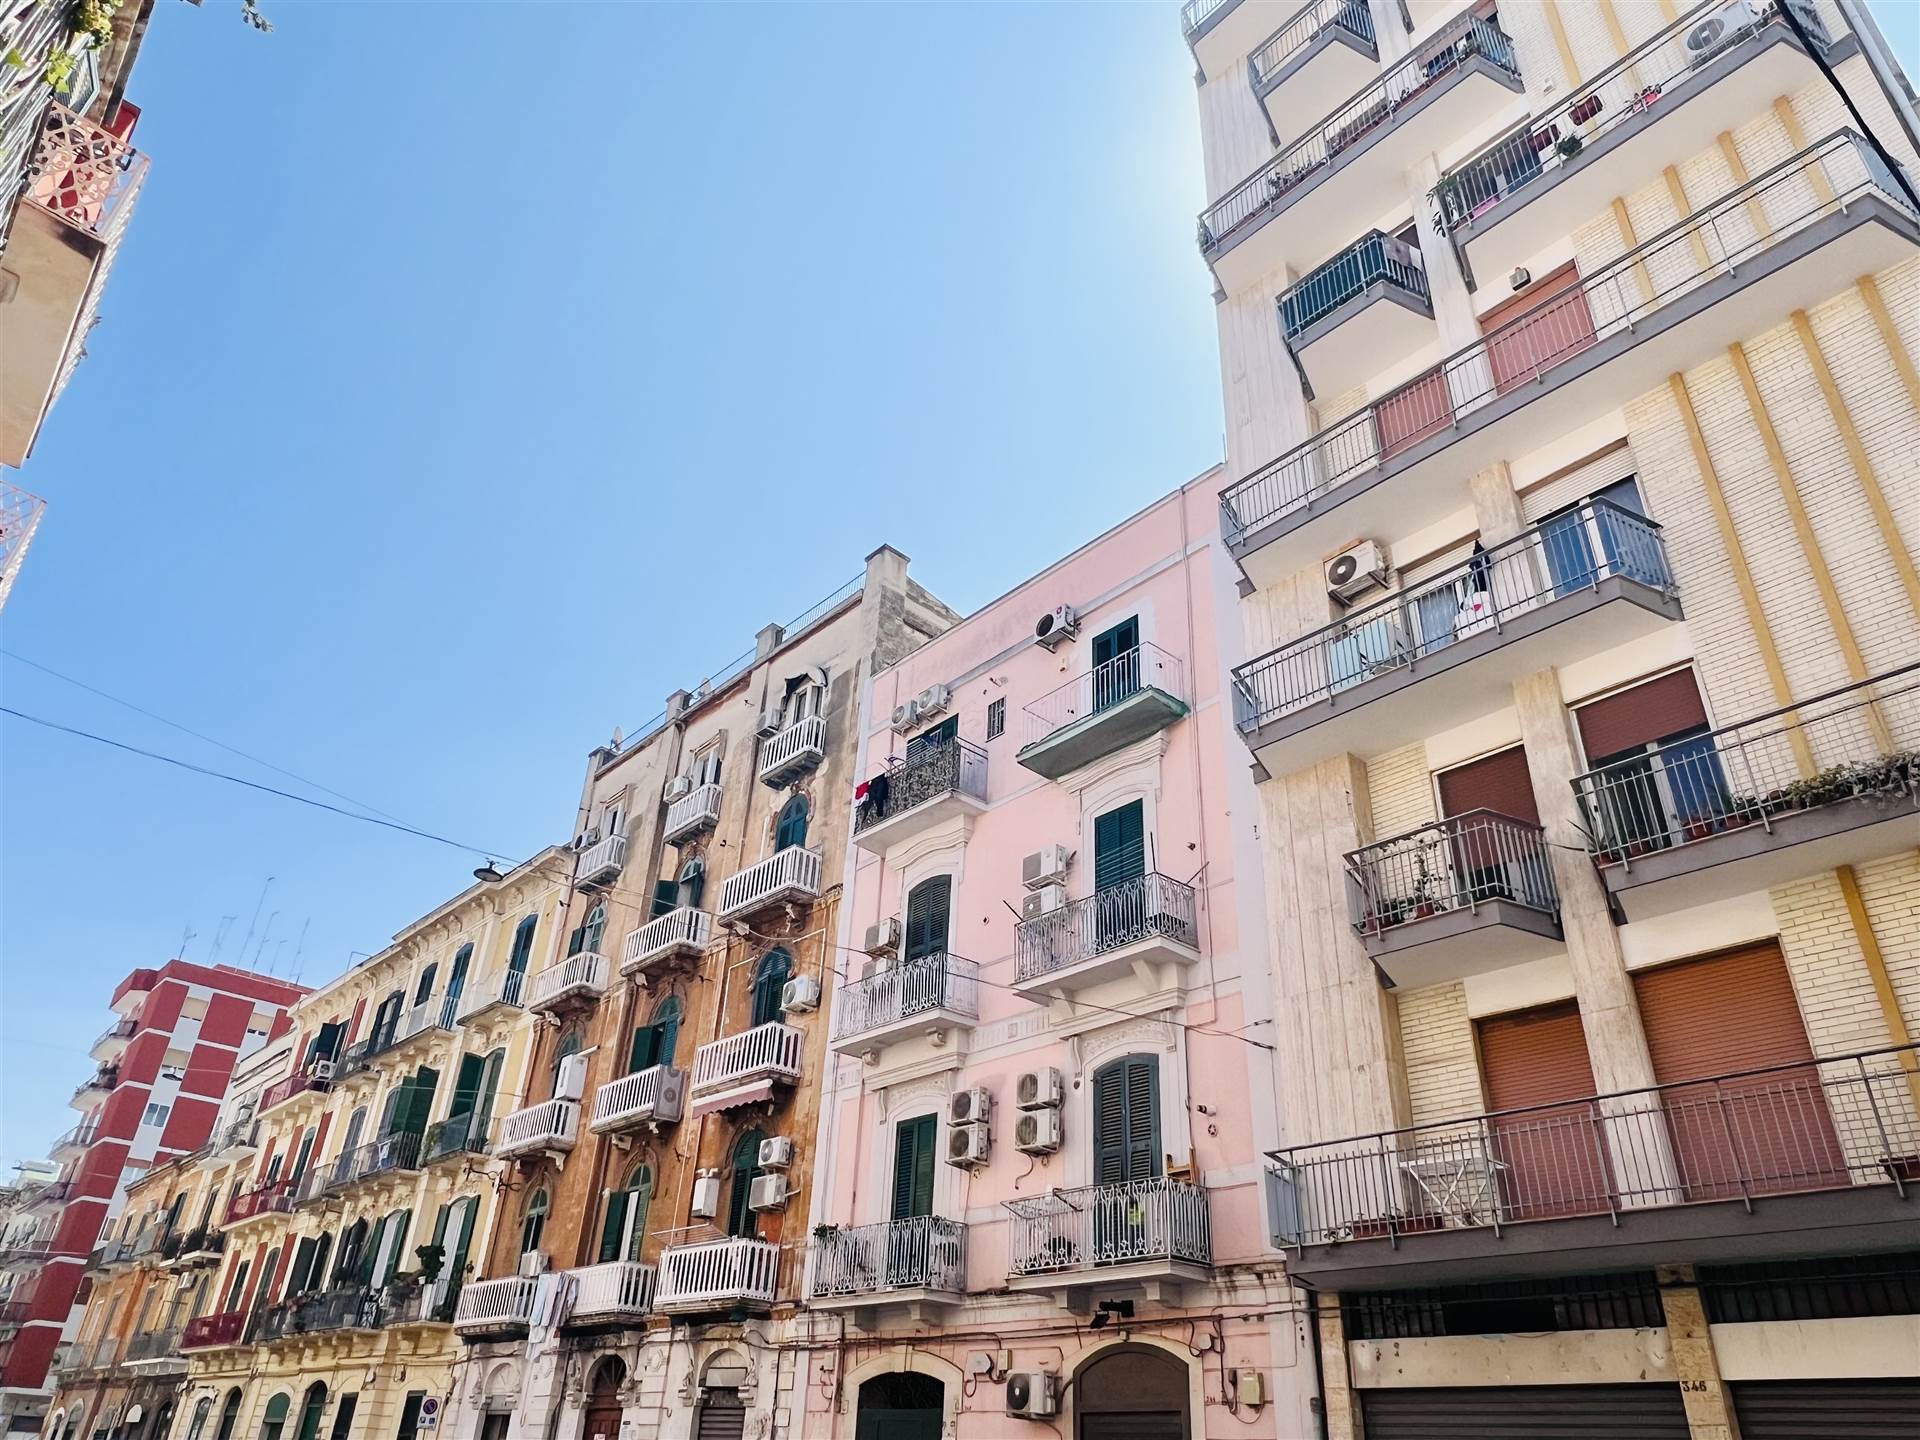 LIBERTÀ, BARI, Apartment for sale of 68 Sq. mt., Be restored, Heating Individual heating system, placed at Ground on 3, composed by: 2 Rooms, Separate kitchen, , 2 Bedrooms, 1 Bathroom, Price: € 69,